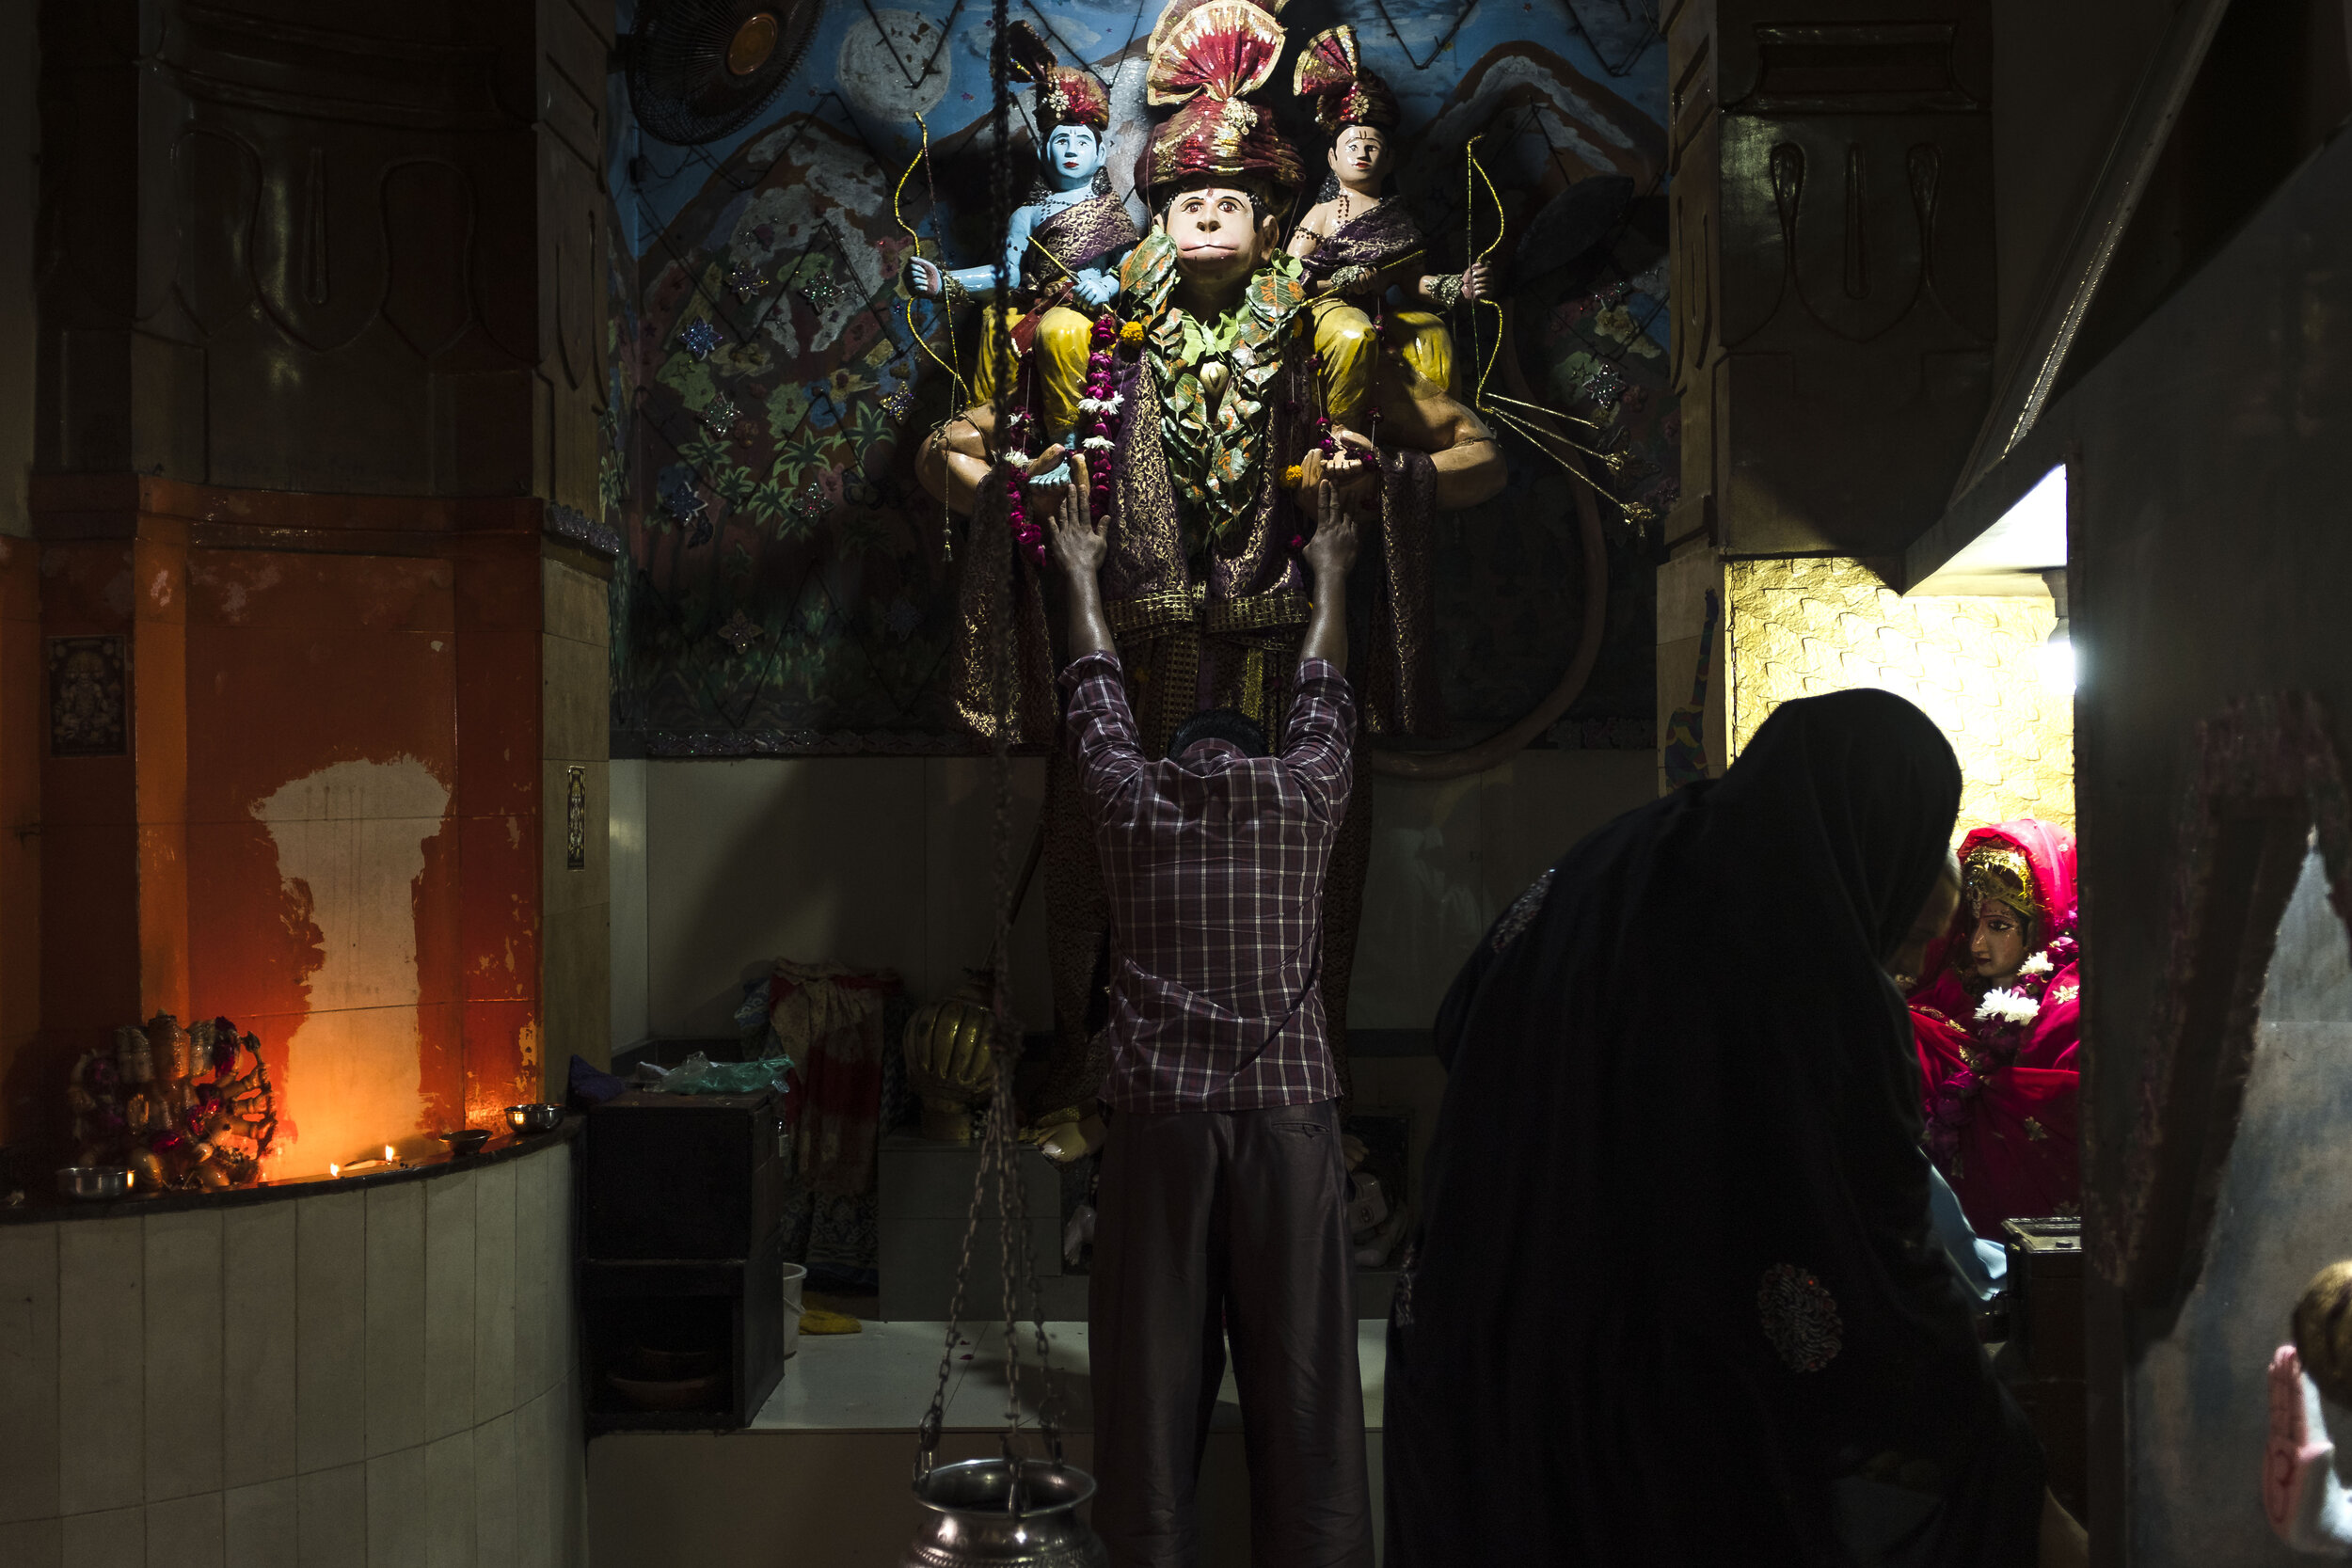  Hindus worship at the Shri Laxmi Narayan Mandir, a 200 year old Hindu temple in Karachi next to the Arabian Sea. Worshippers often throw personal effects and miscellaneous items into the sea as ritualistic offerings or to ward of bad omens. Items pe